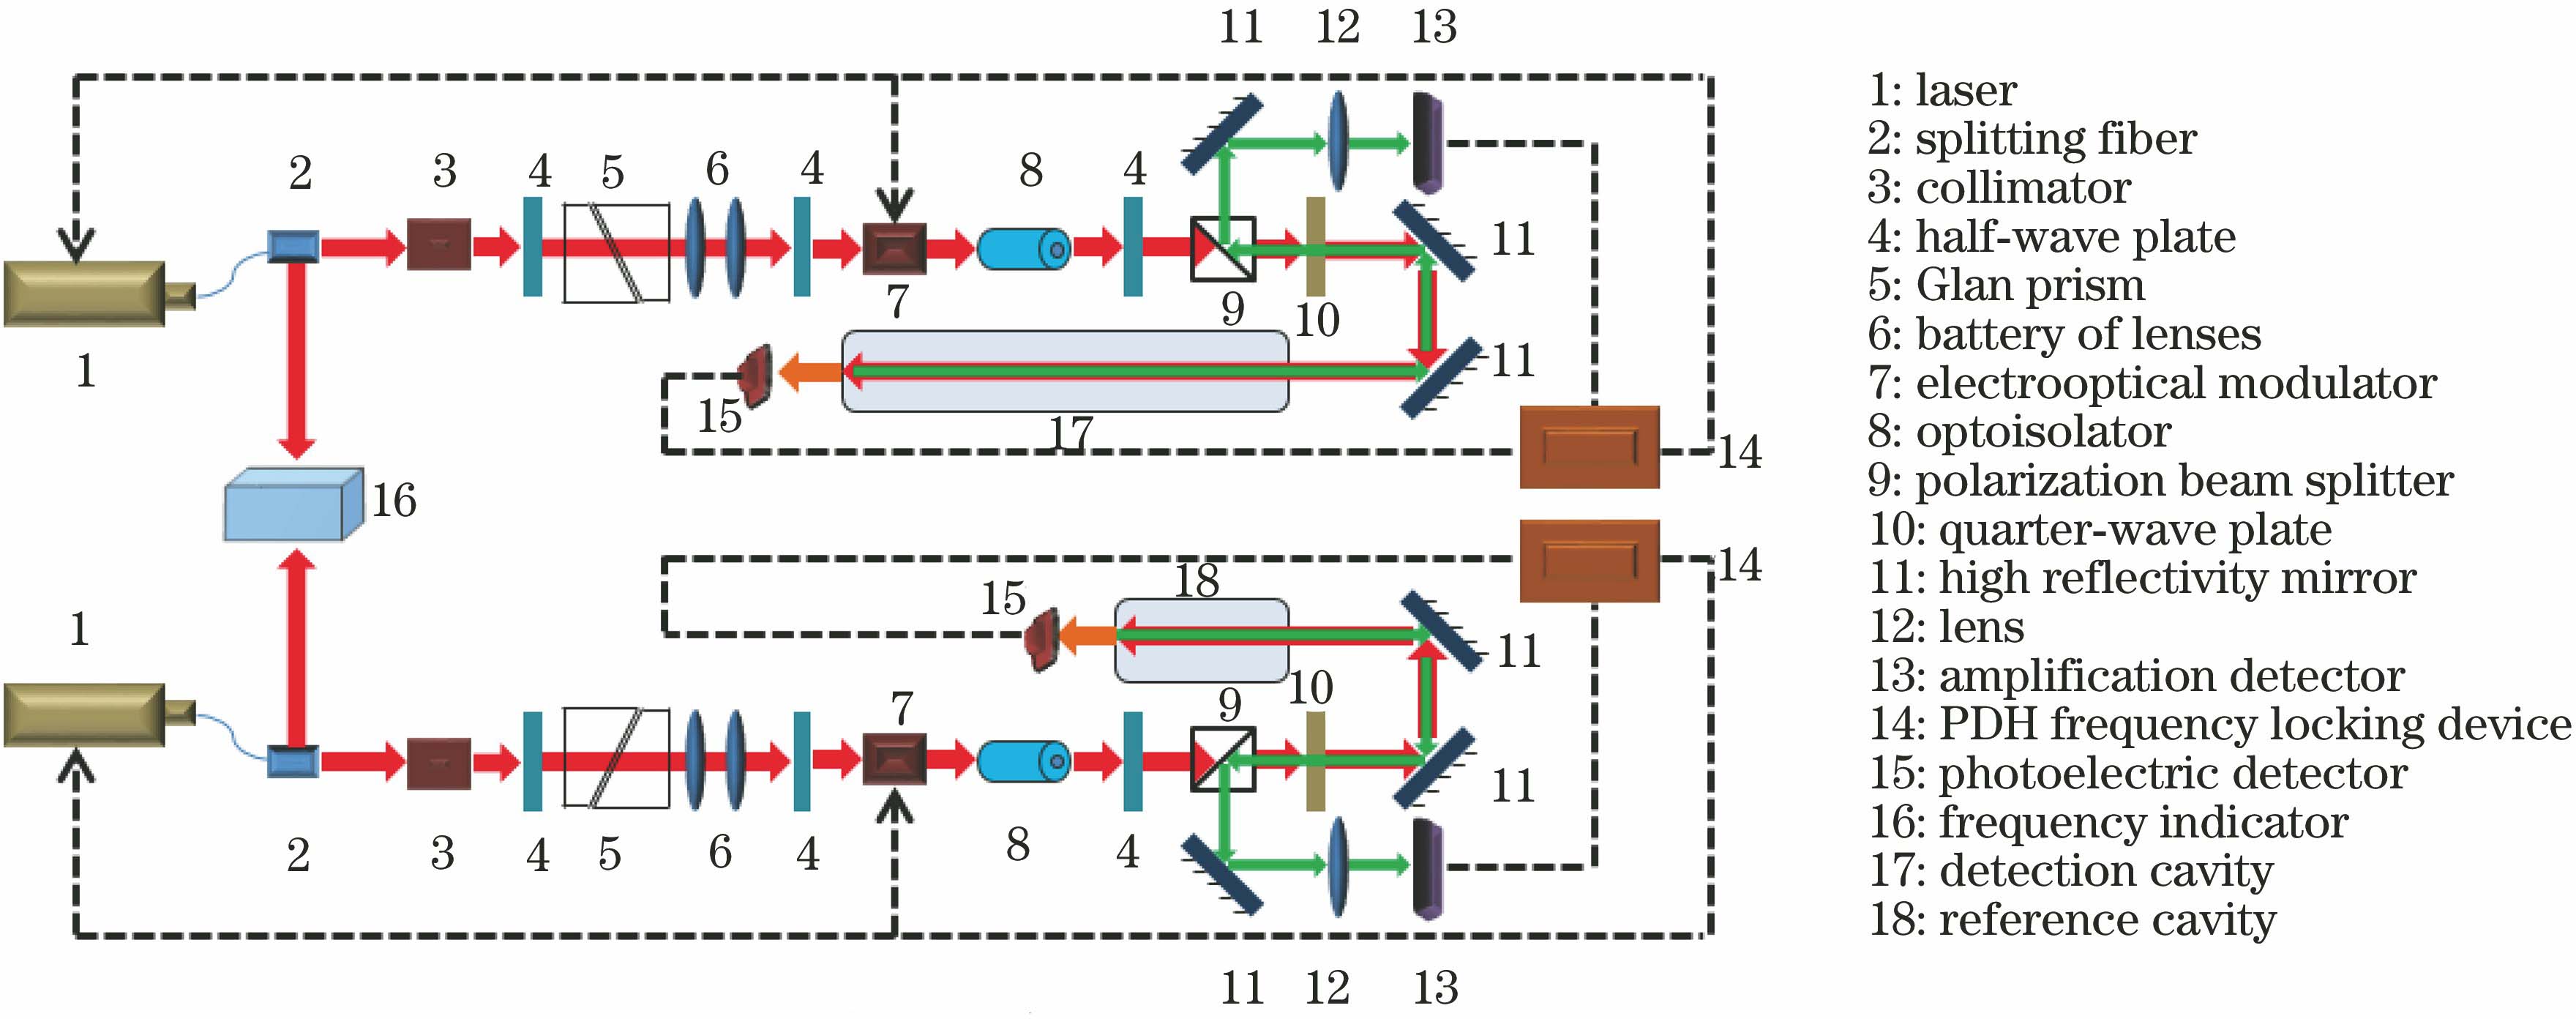 Structural diagram of quantum vacuum measurement device based on Fabry-Perot resonant cavity